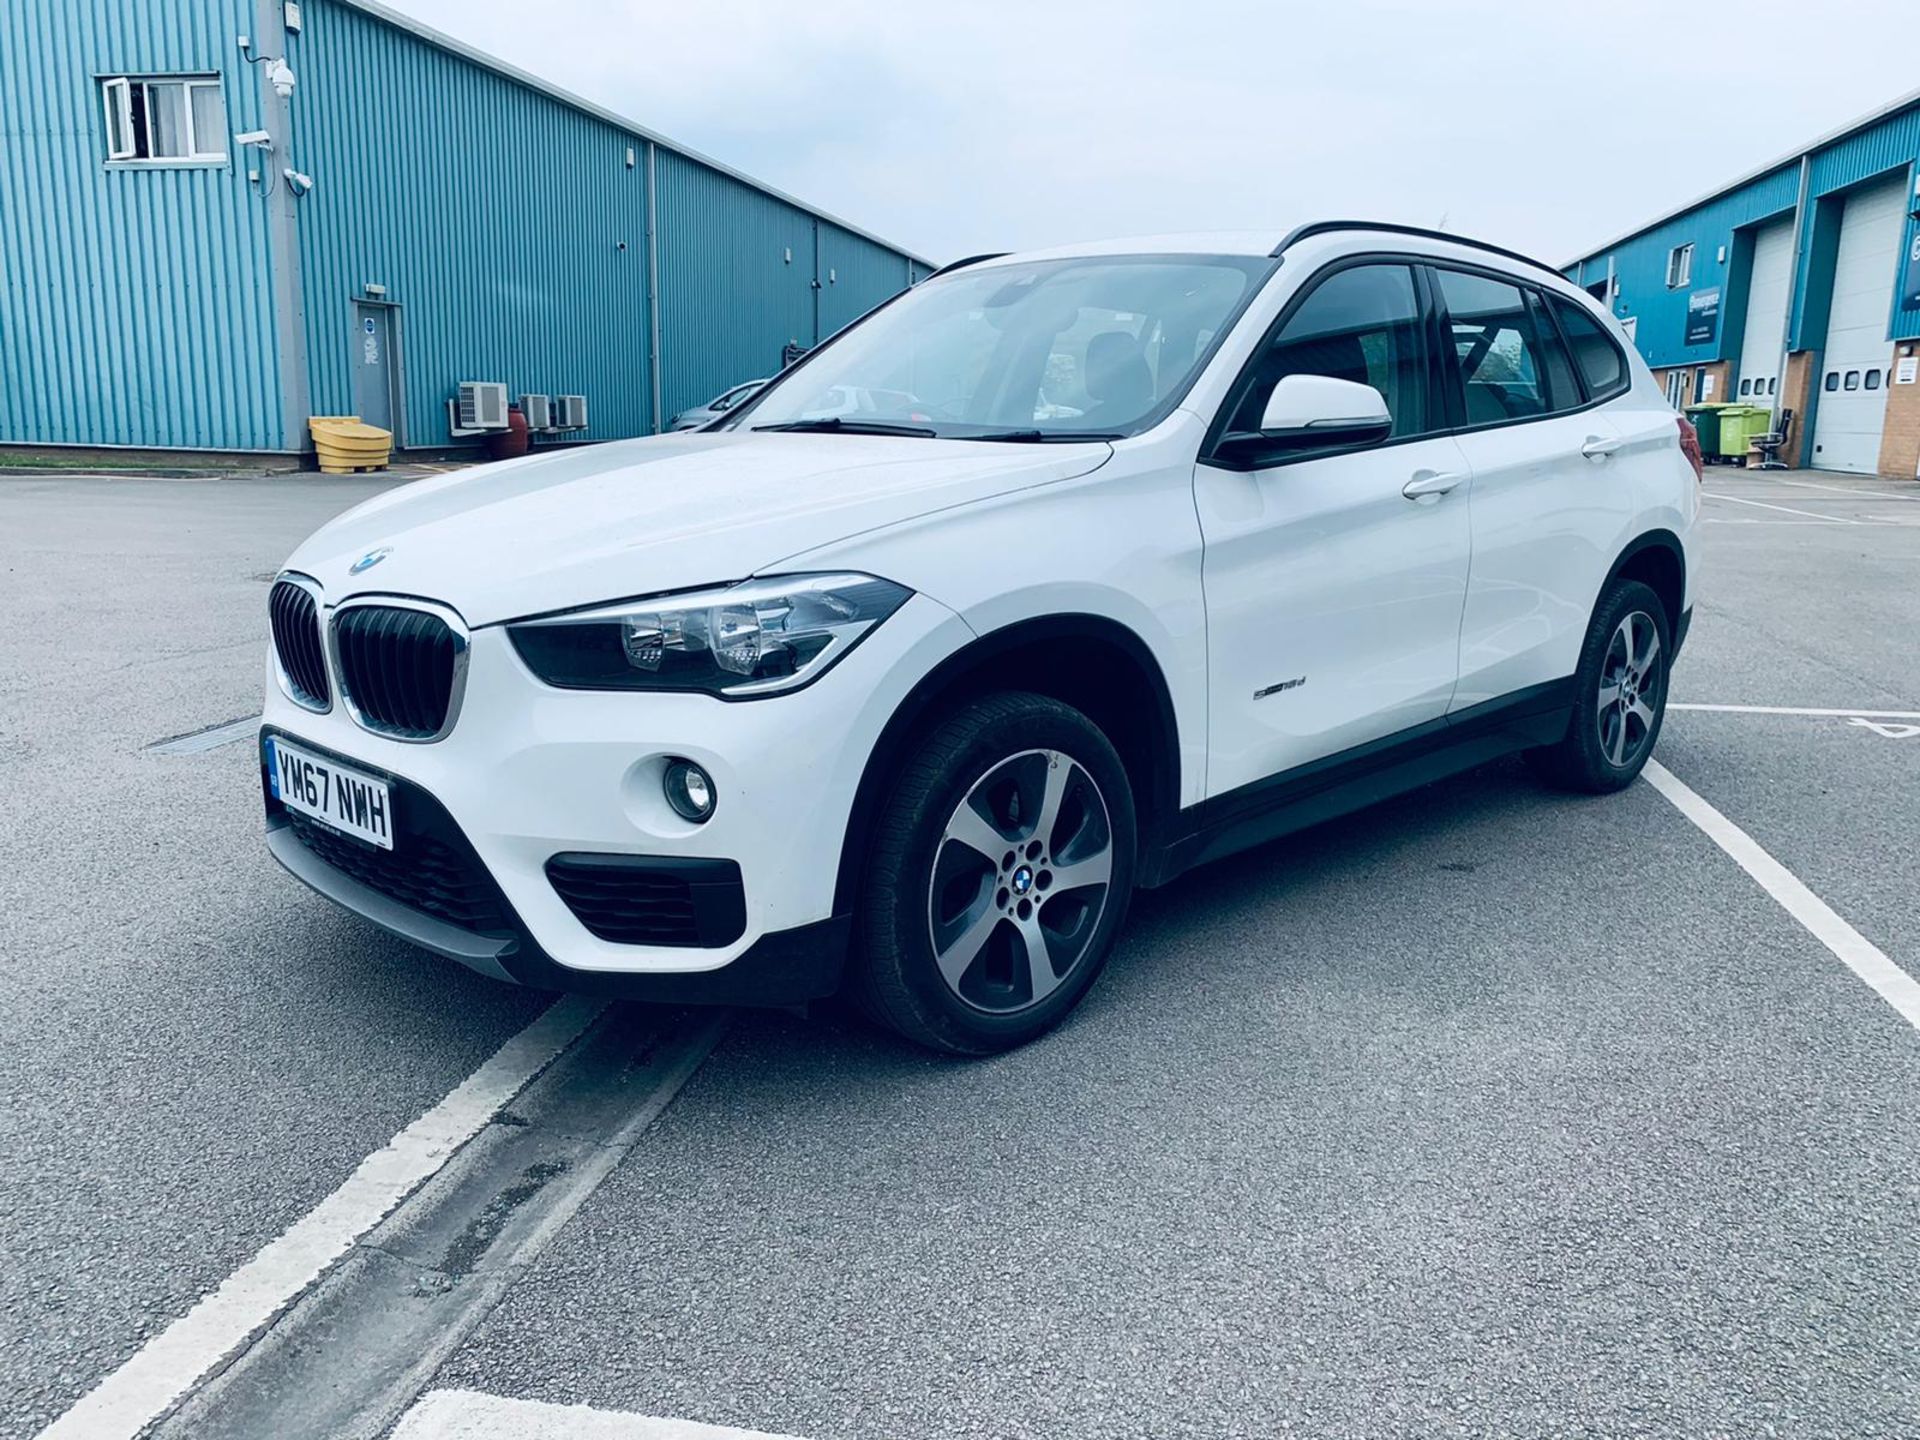 BMW X1 sDrive 2.0d Special Equipment Auto - 2018 Reg - Service History - 1 Owner From New - Image 2 of 25